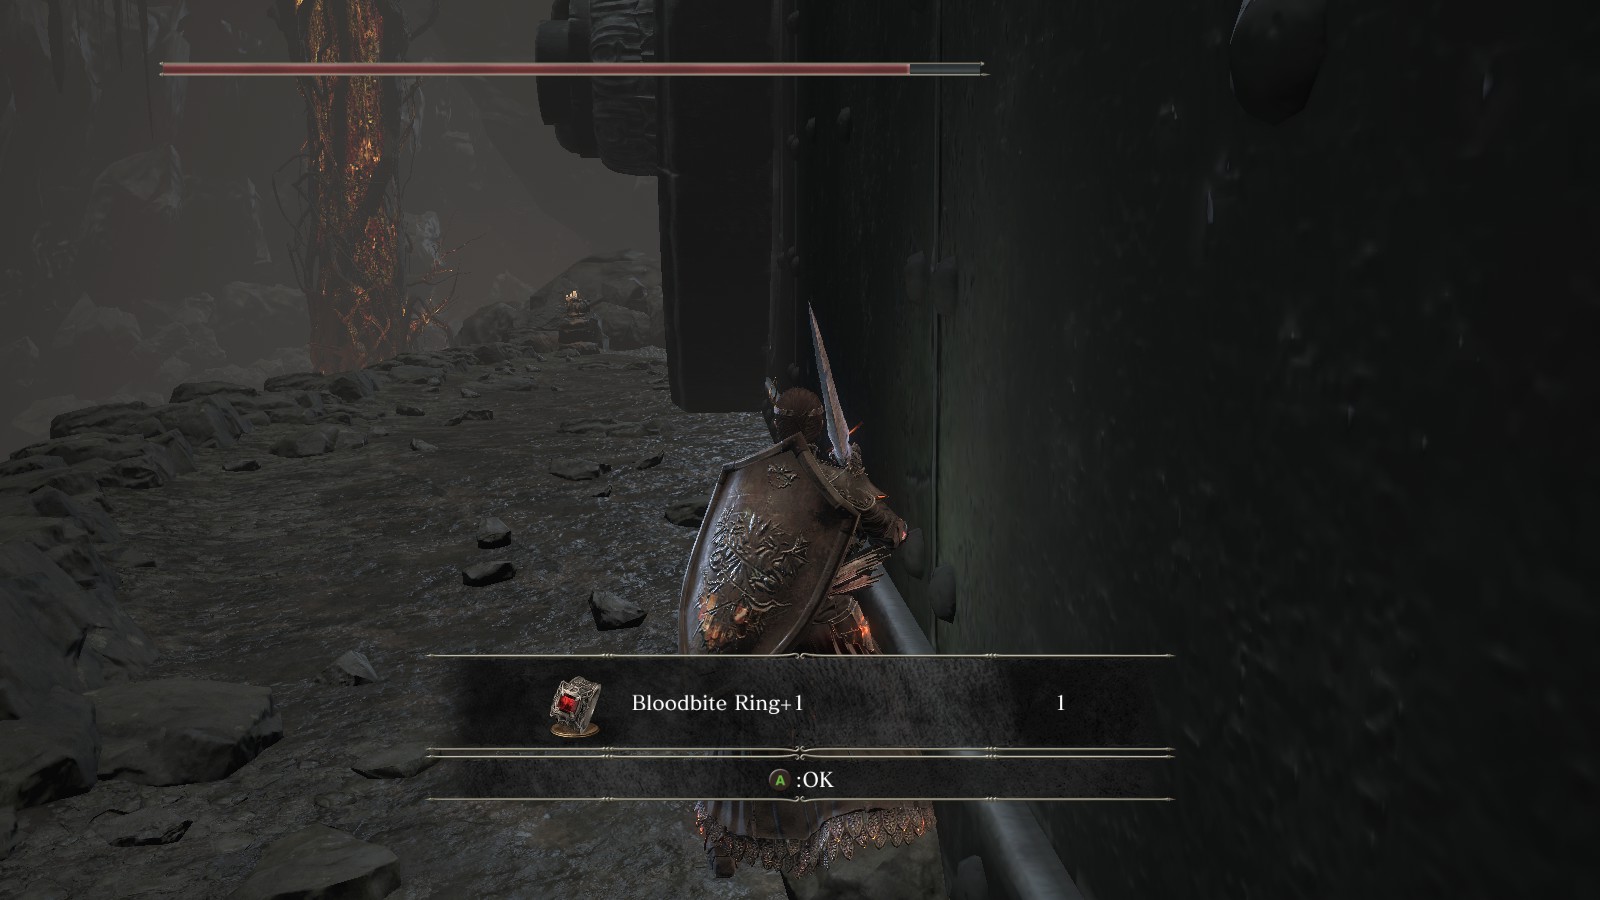 Sometimes, I rol. And sometimes, I atac. But most importantly, I ded (pls  help I don't know why I suddenly suck wtf happened I've been playing DS1R  for like a week) : r/darksouls3